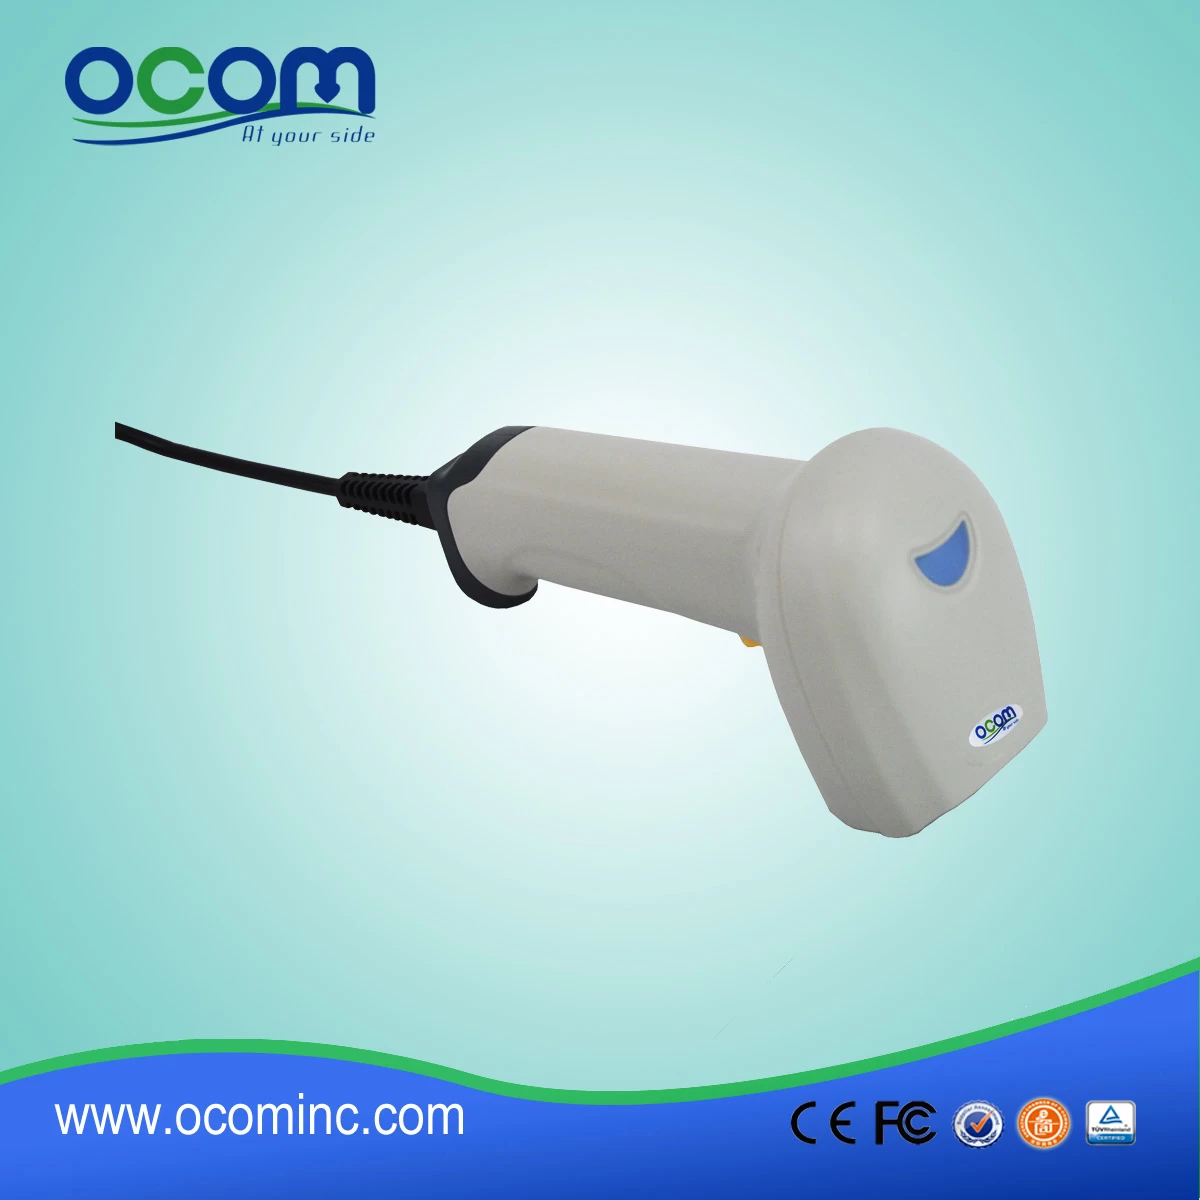 China made high quality Handheld Laser Barcode Scanner-OCBS-L006